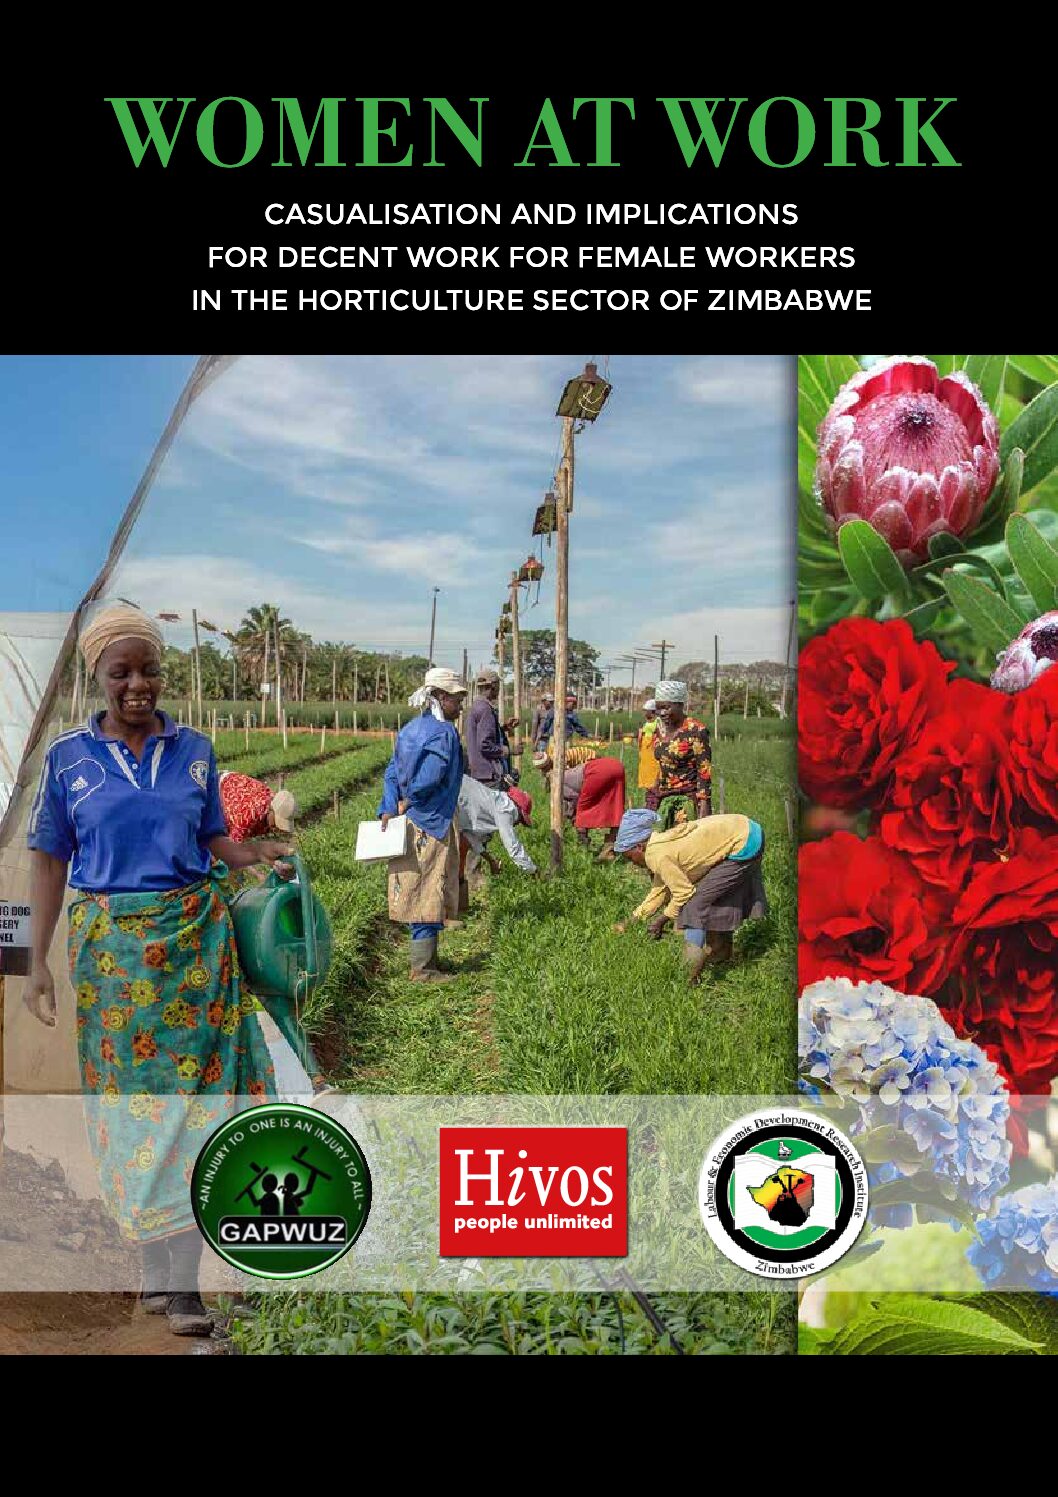 Casualization and implications for decent work for female workers in the horticulture sector of Zimbabwe